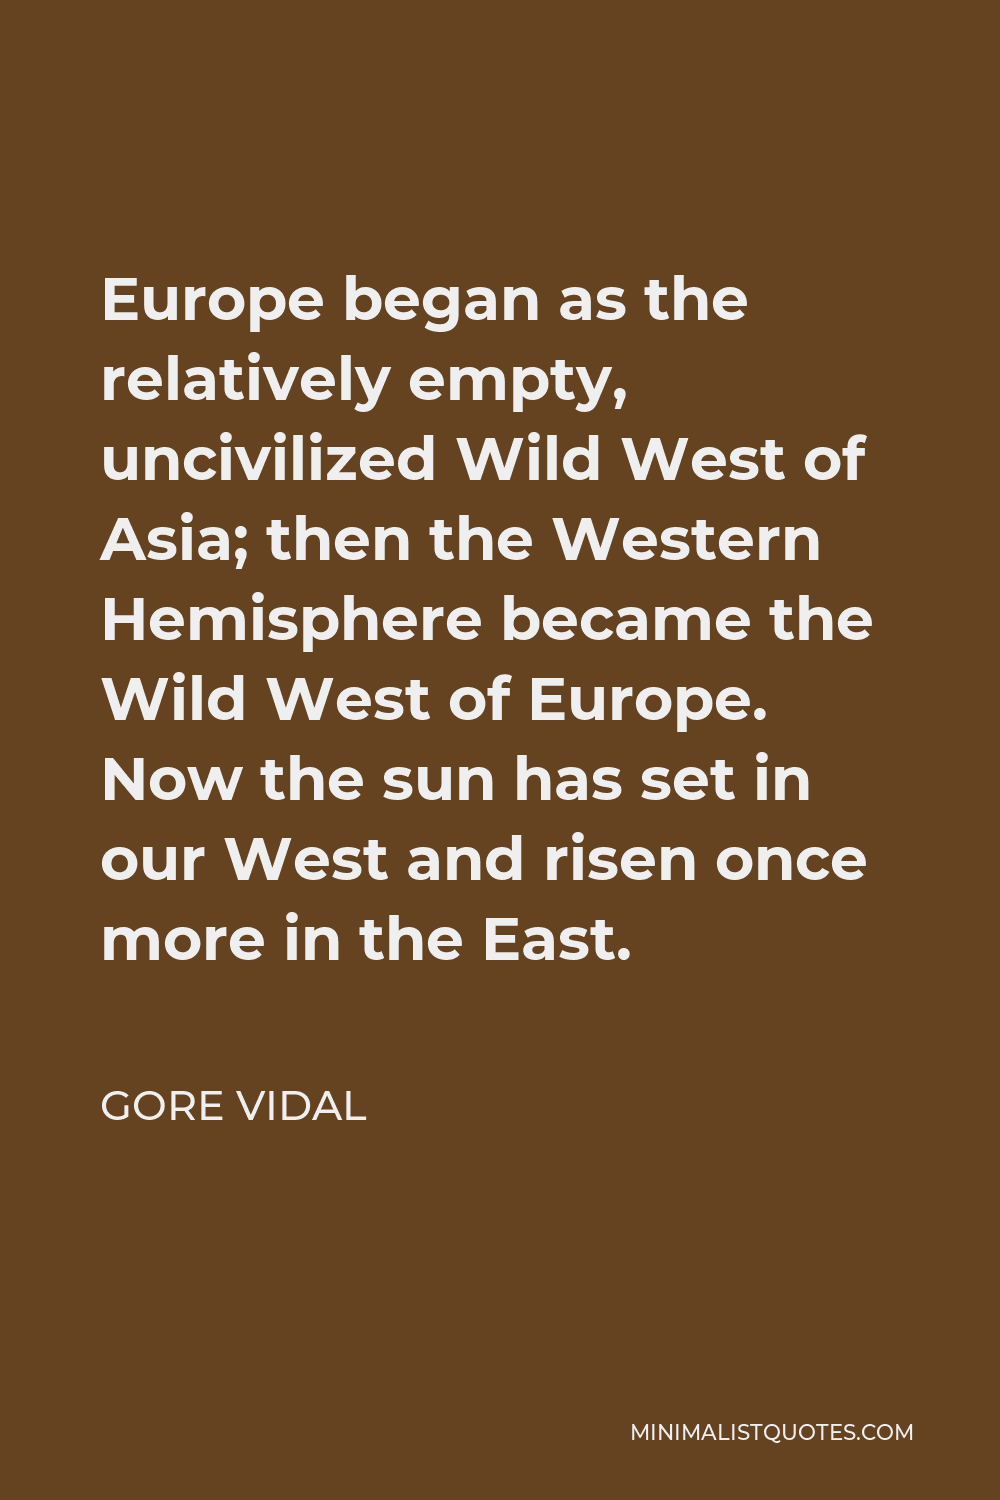 Gore Vidal Quote - Europe began as the relatively empty, uncivilized Wild West of Asia; then the Western Hemisphere became the Wild West of Europe. Now the sun has set in our West and risen once more in the East.